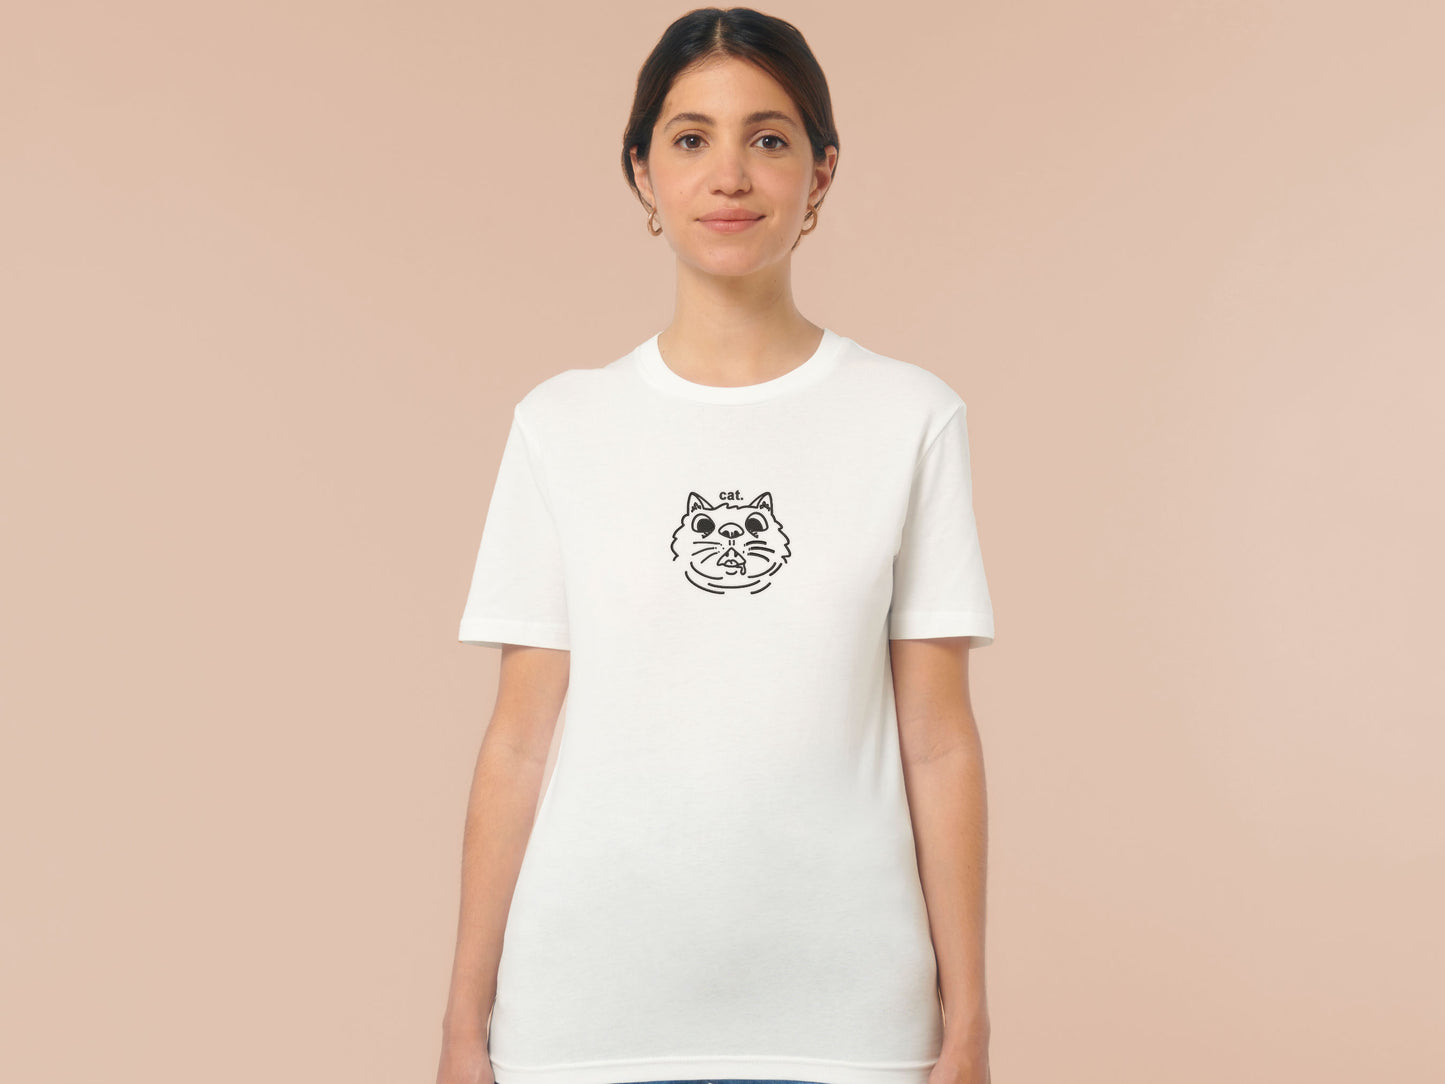 Woman wearing a short sleeved white t-shirt with an Embroidered cat design